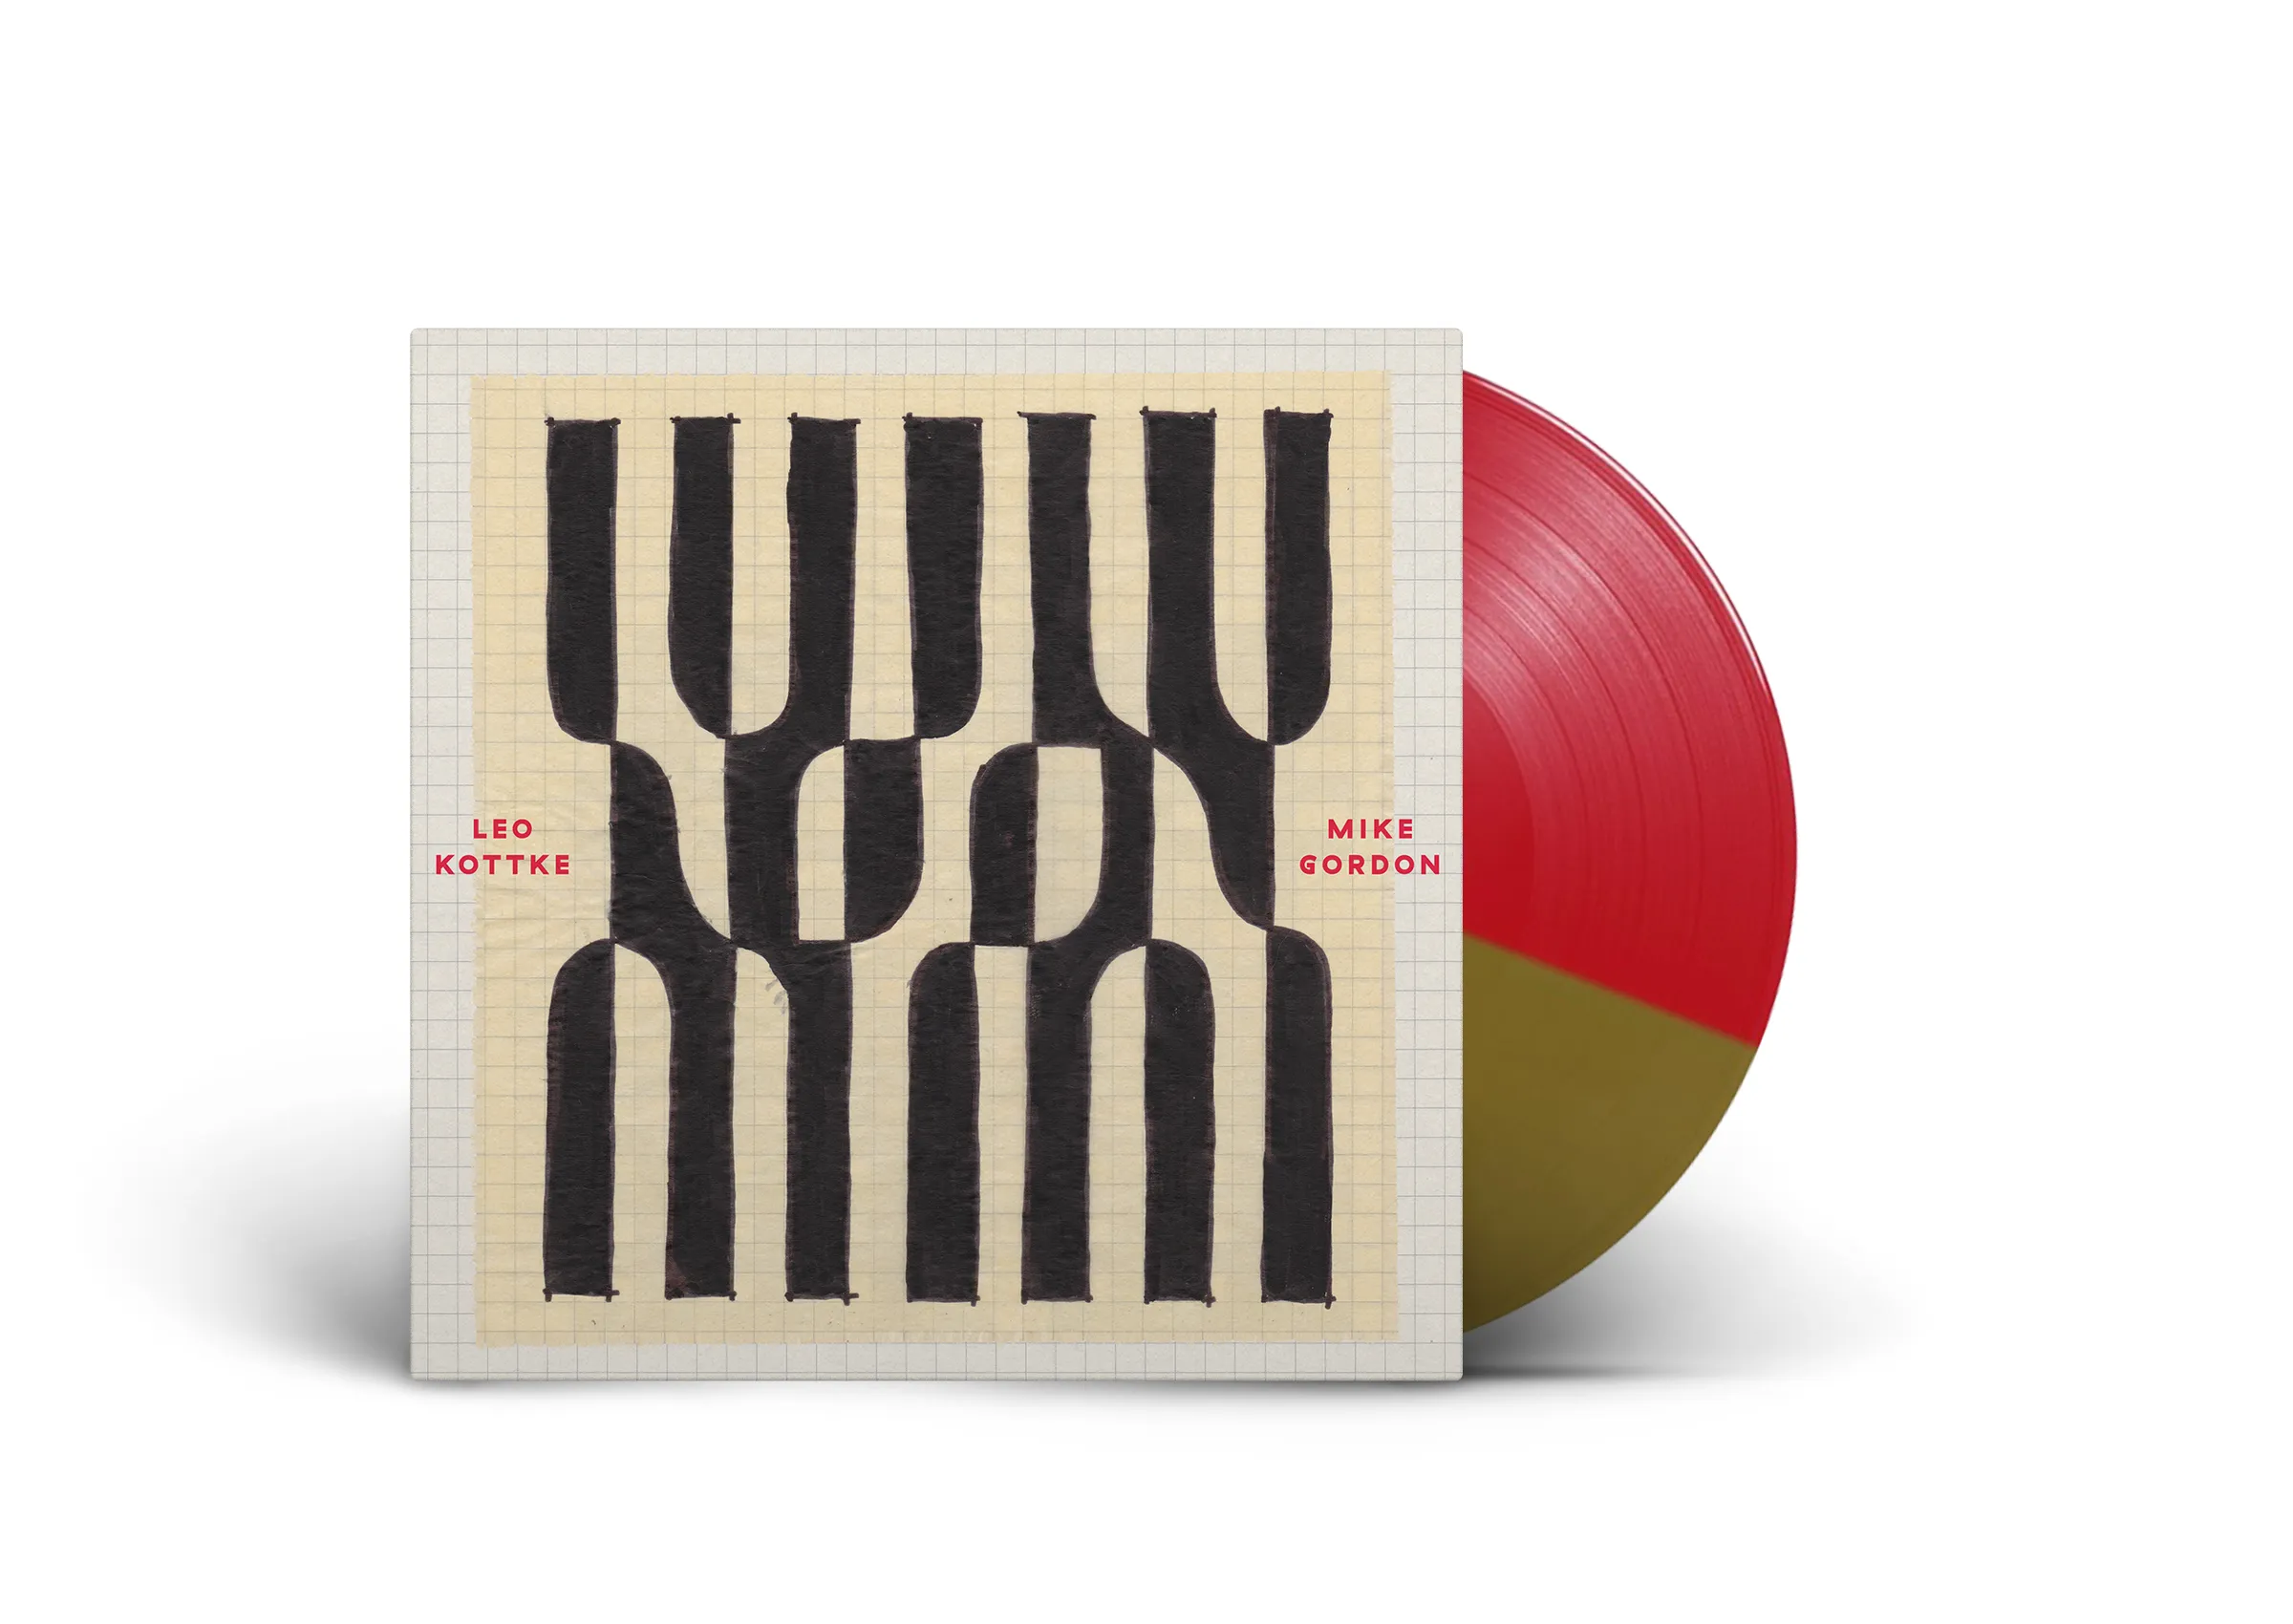 Gold/Red LP